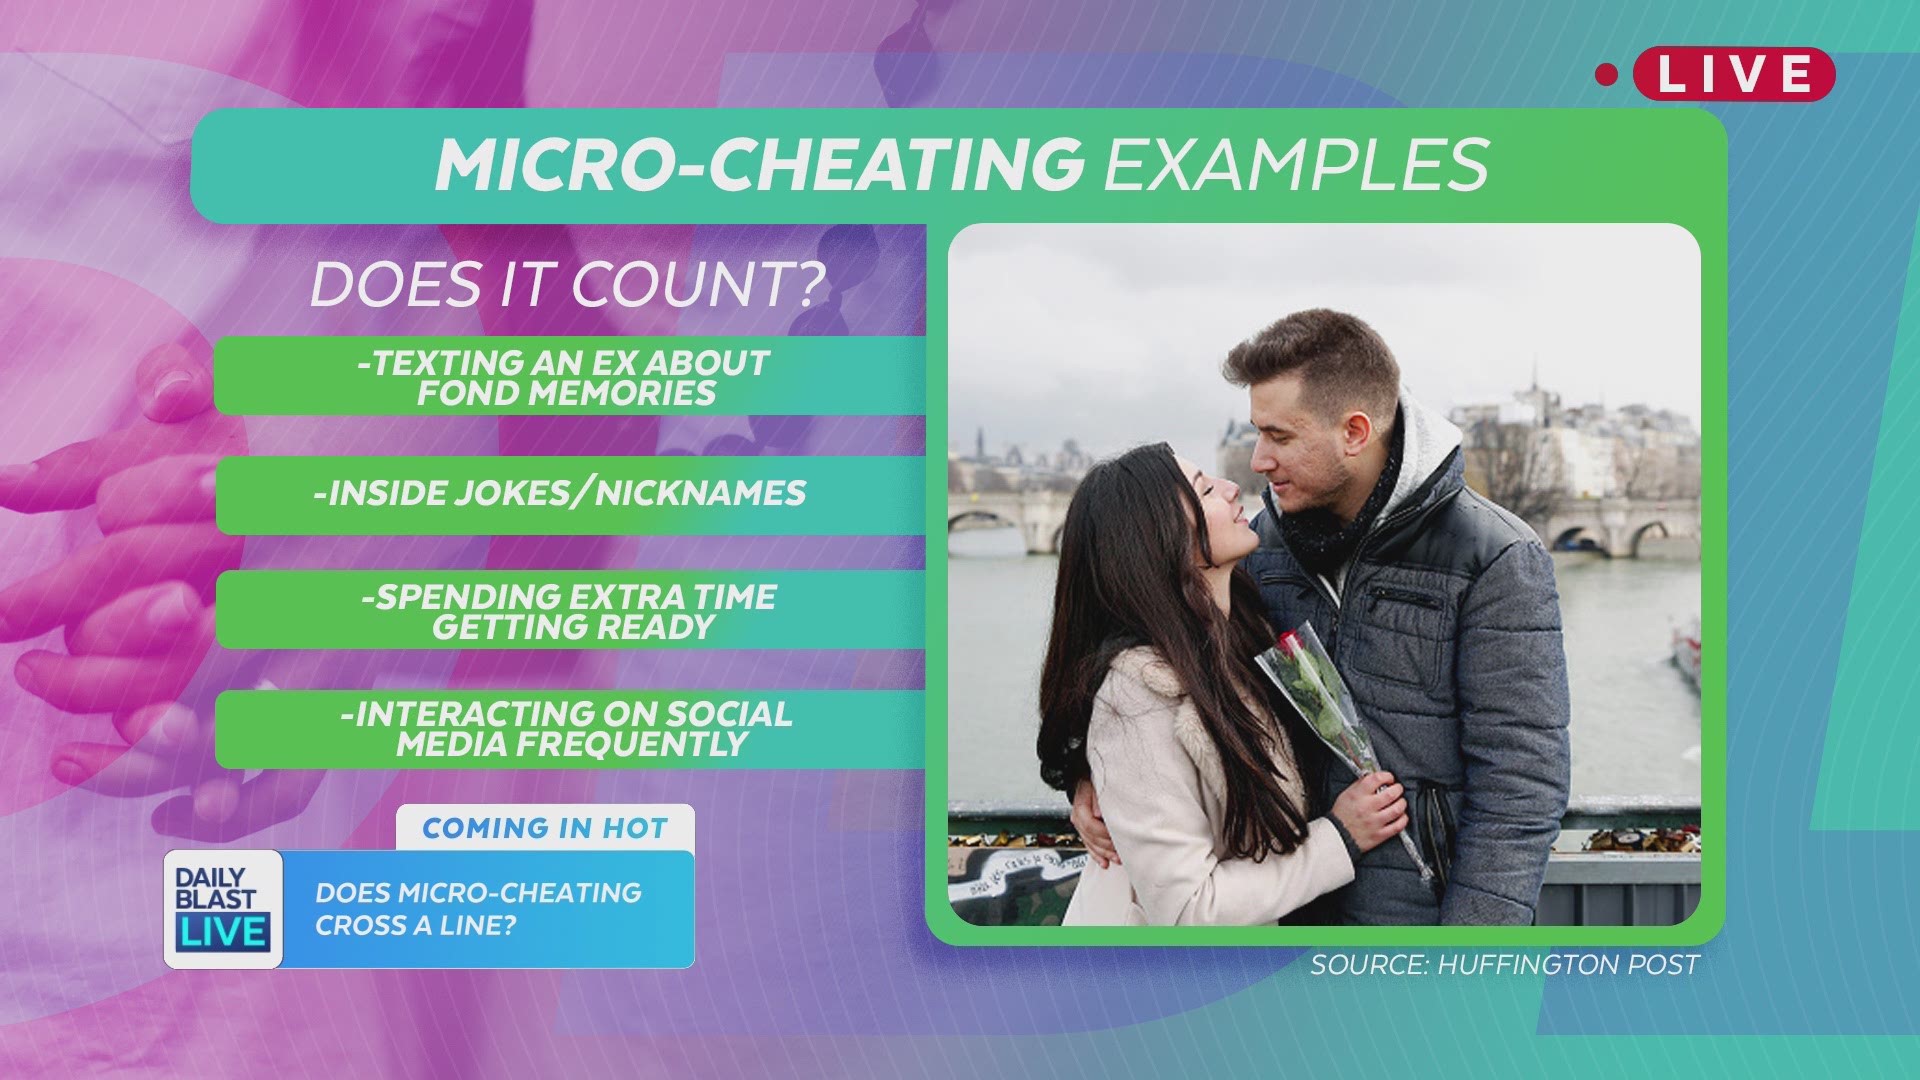 Micro-cheating is the newest buzzword in committed relationships. It is a new term for all the tiny ways you can be unfaithful without actually having relations. A dating expert says, "Micro-cheating is a series of seemingly small actions that indicate a 